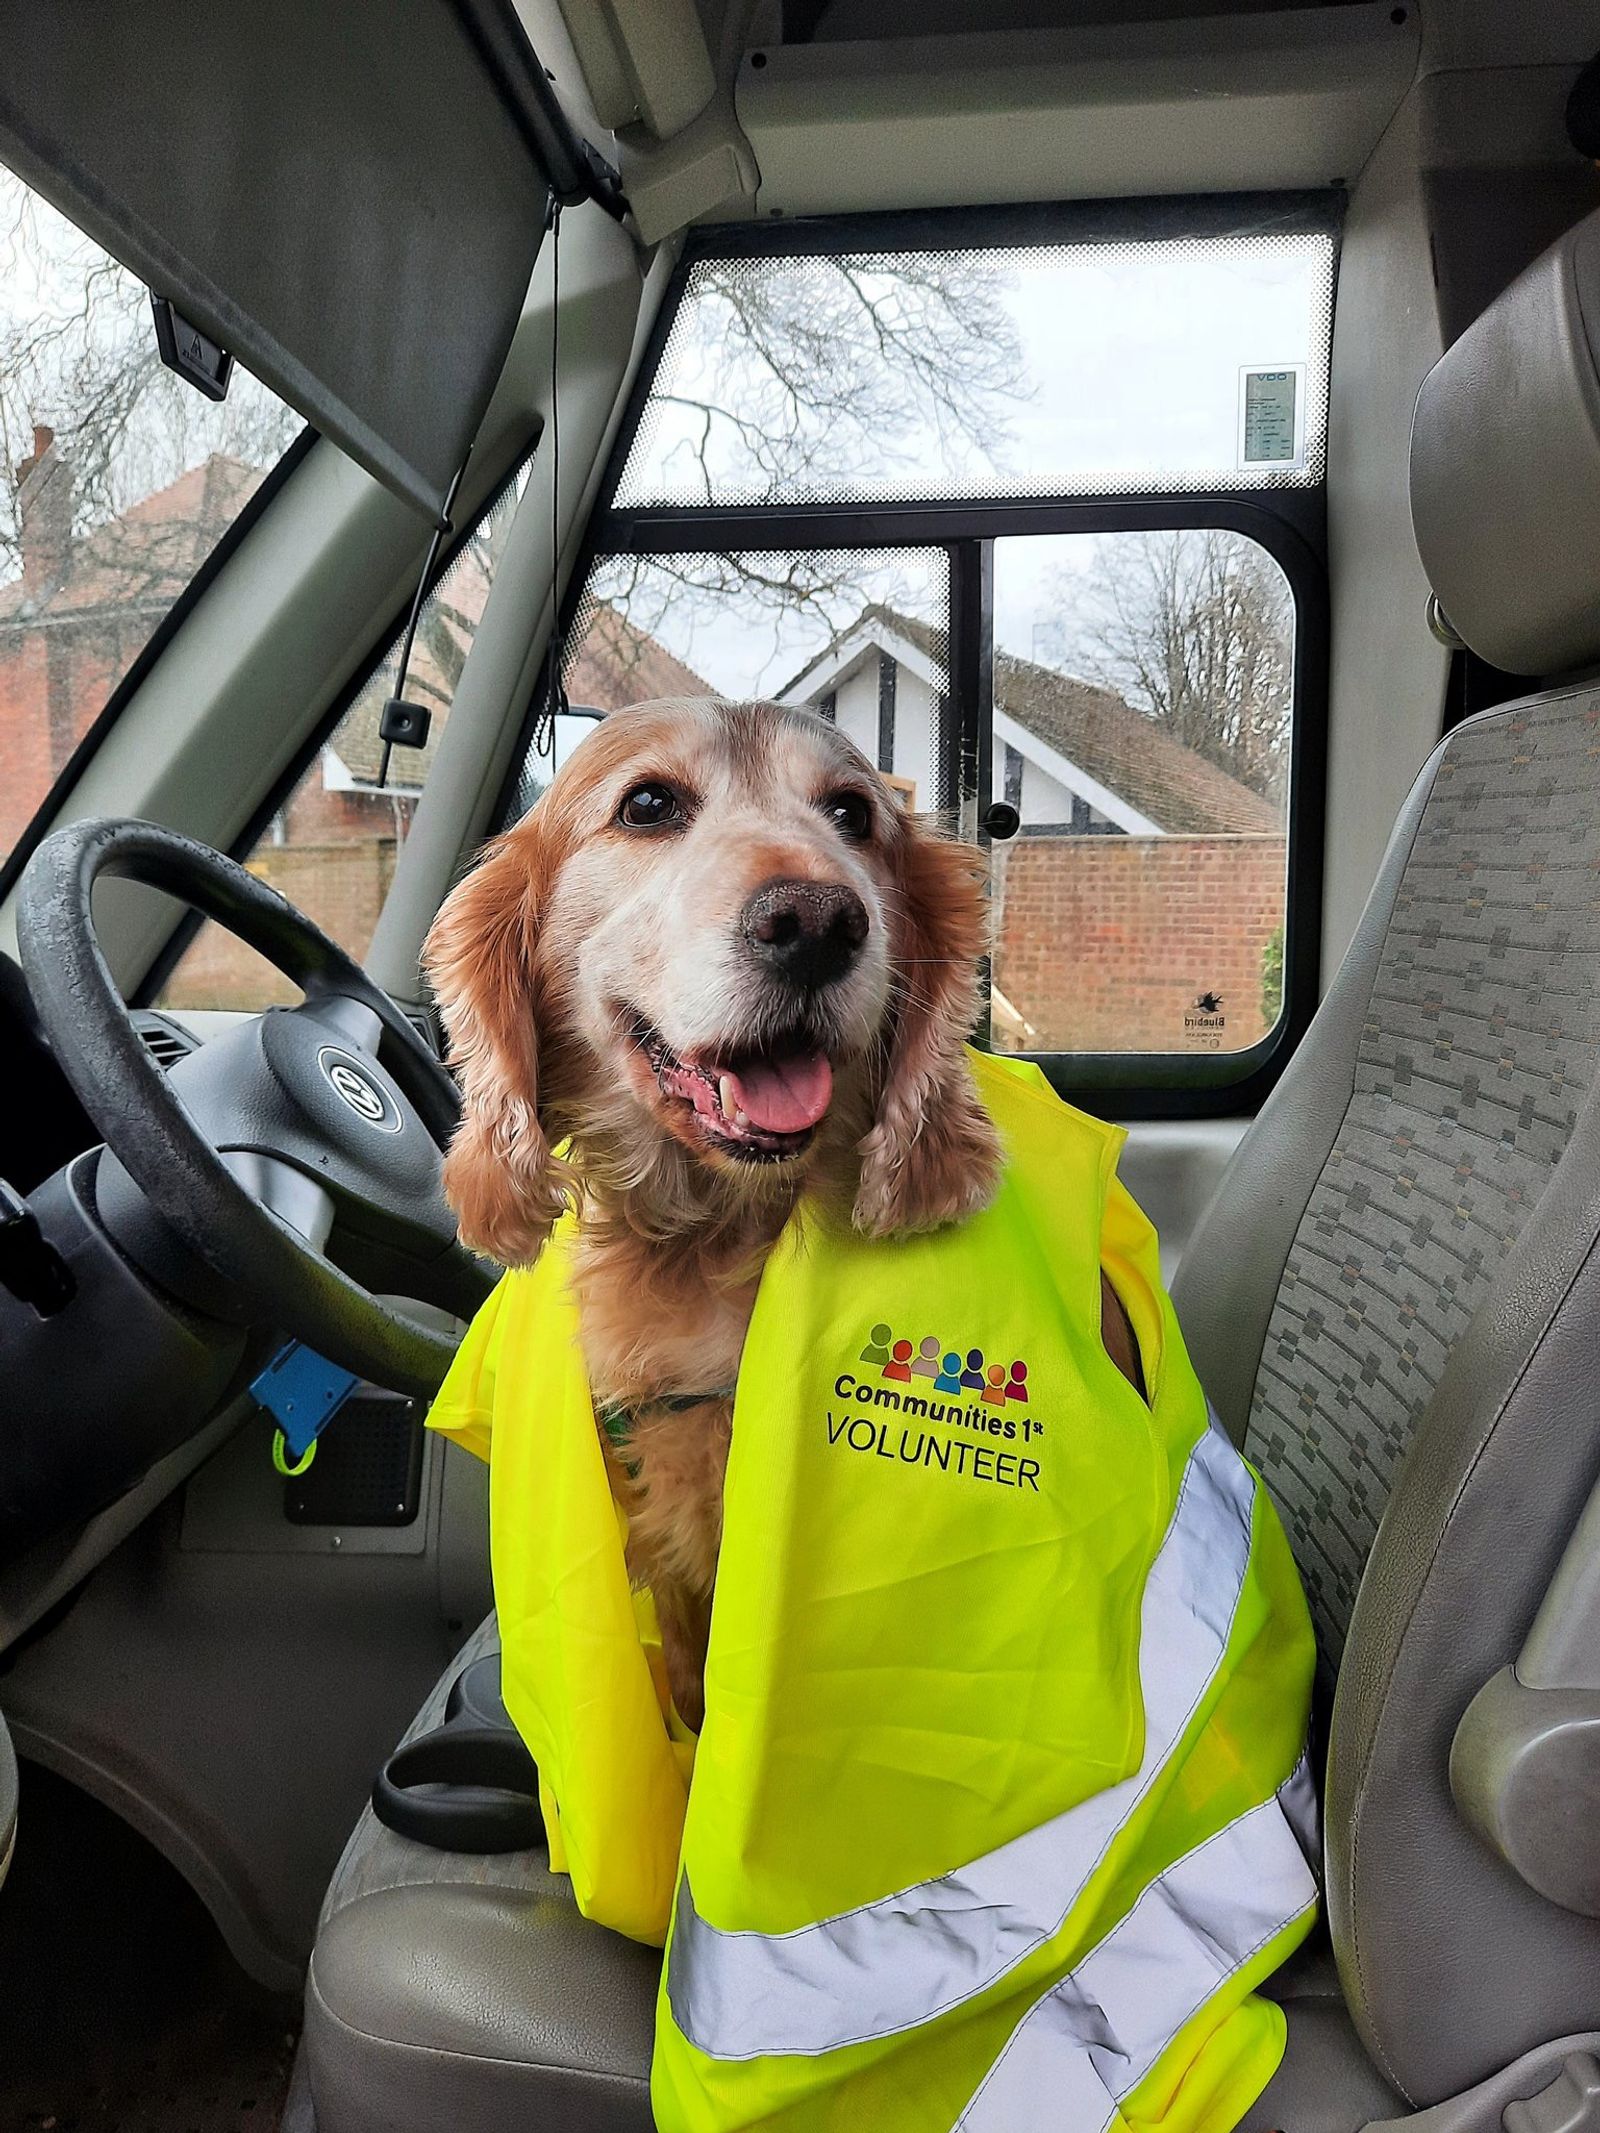 “We do not allow our canine volunteers to drive…” say Communities 1st.